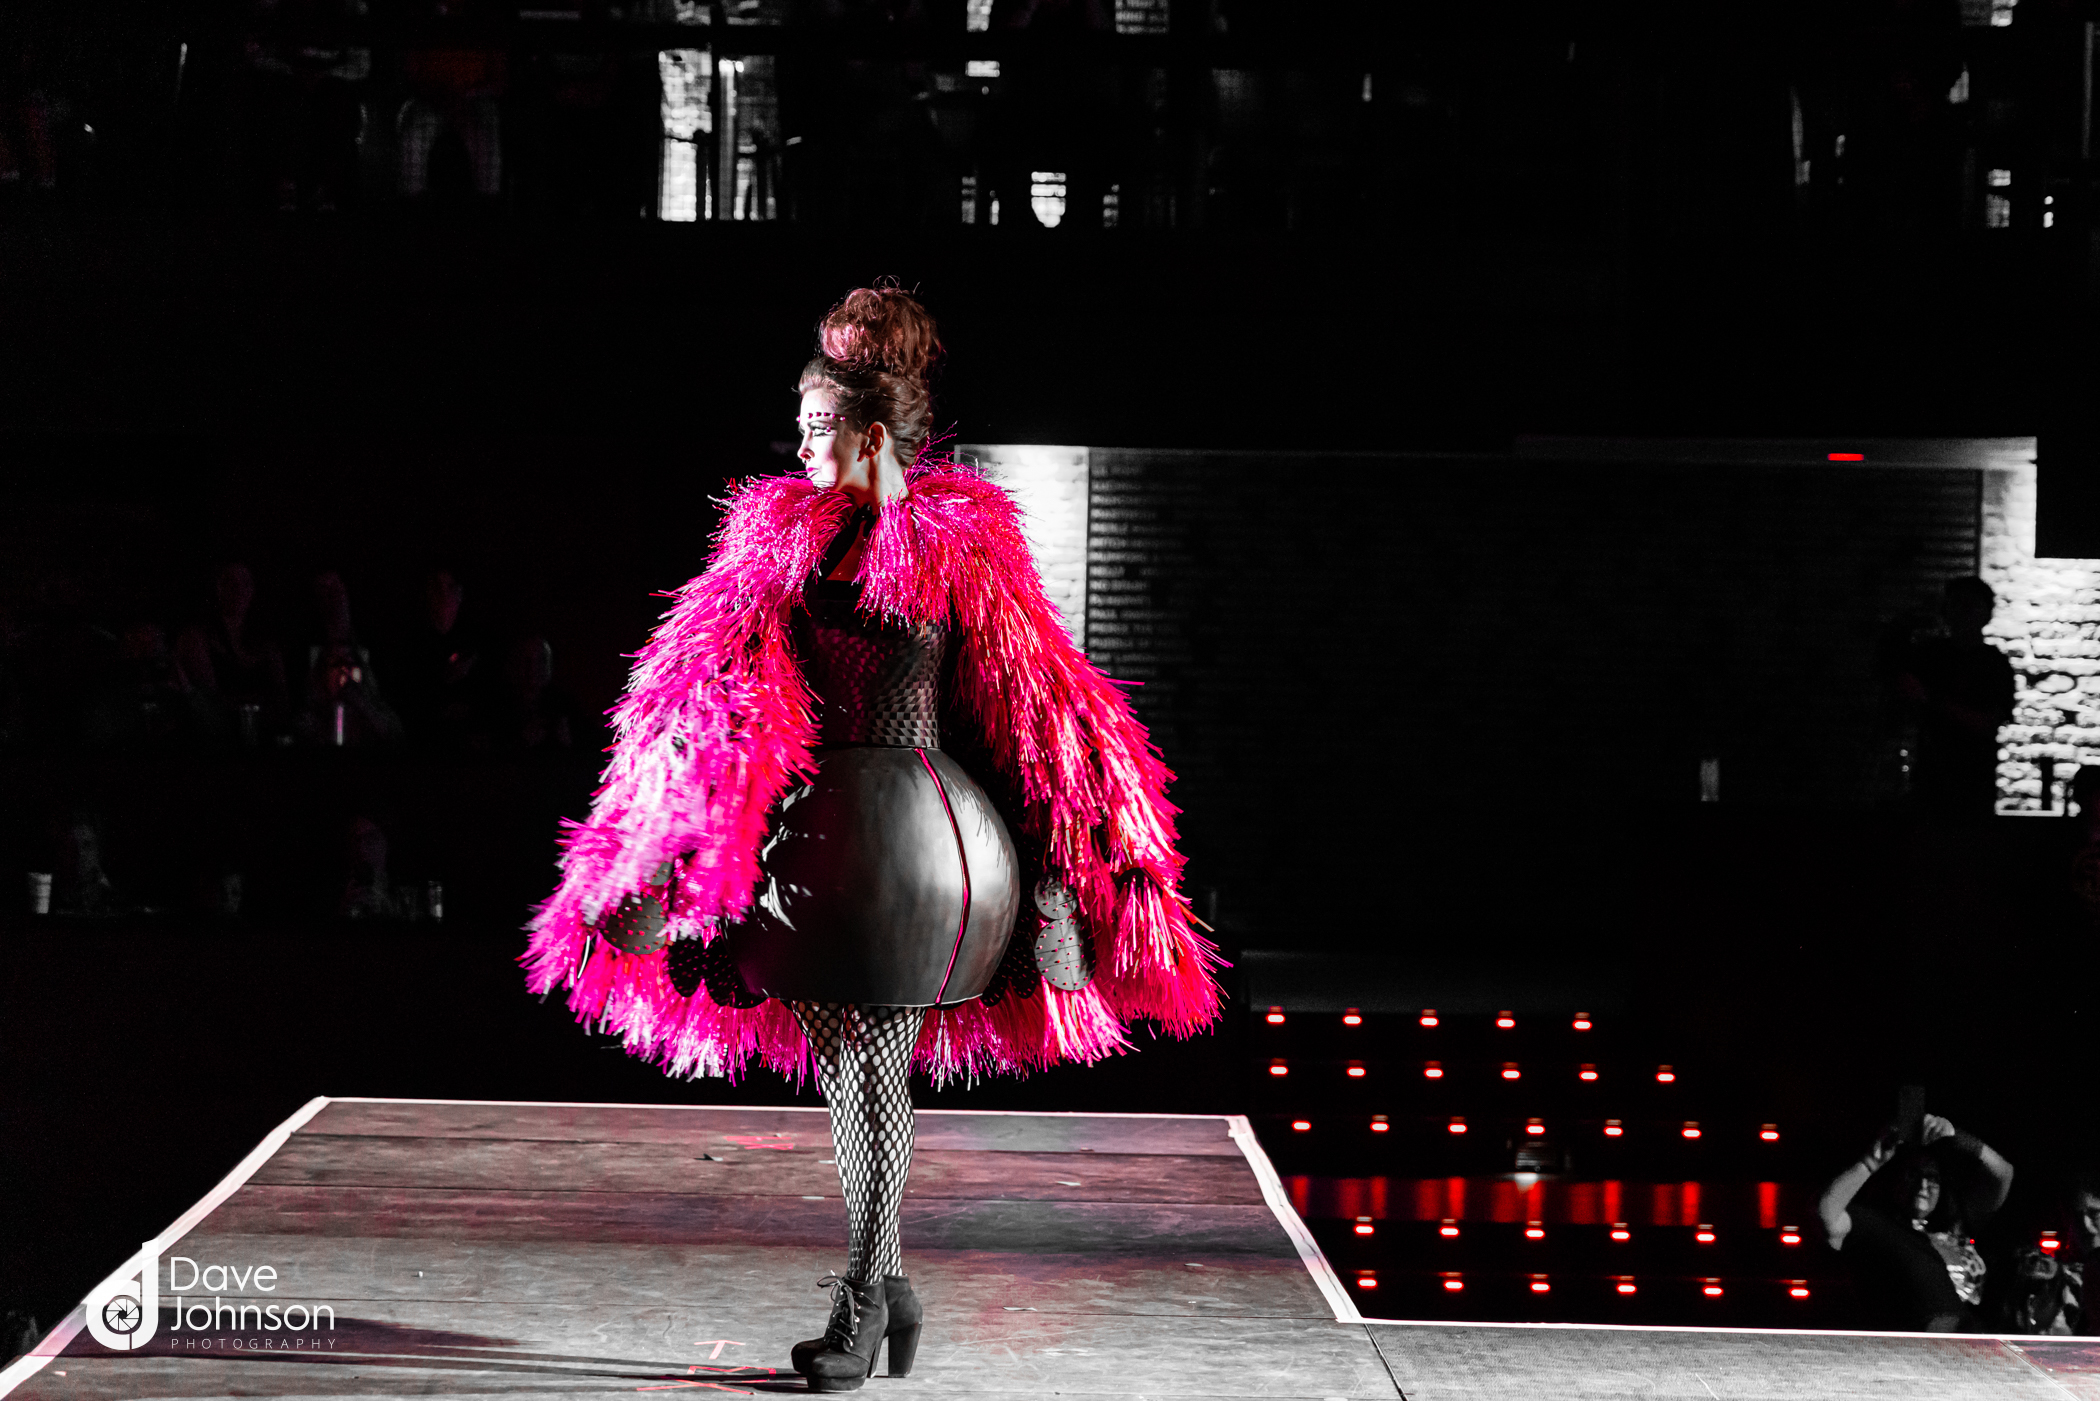 Top Trends From ADCD's 13th Annual Paper Fashion Show - 303 Magazine